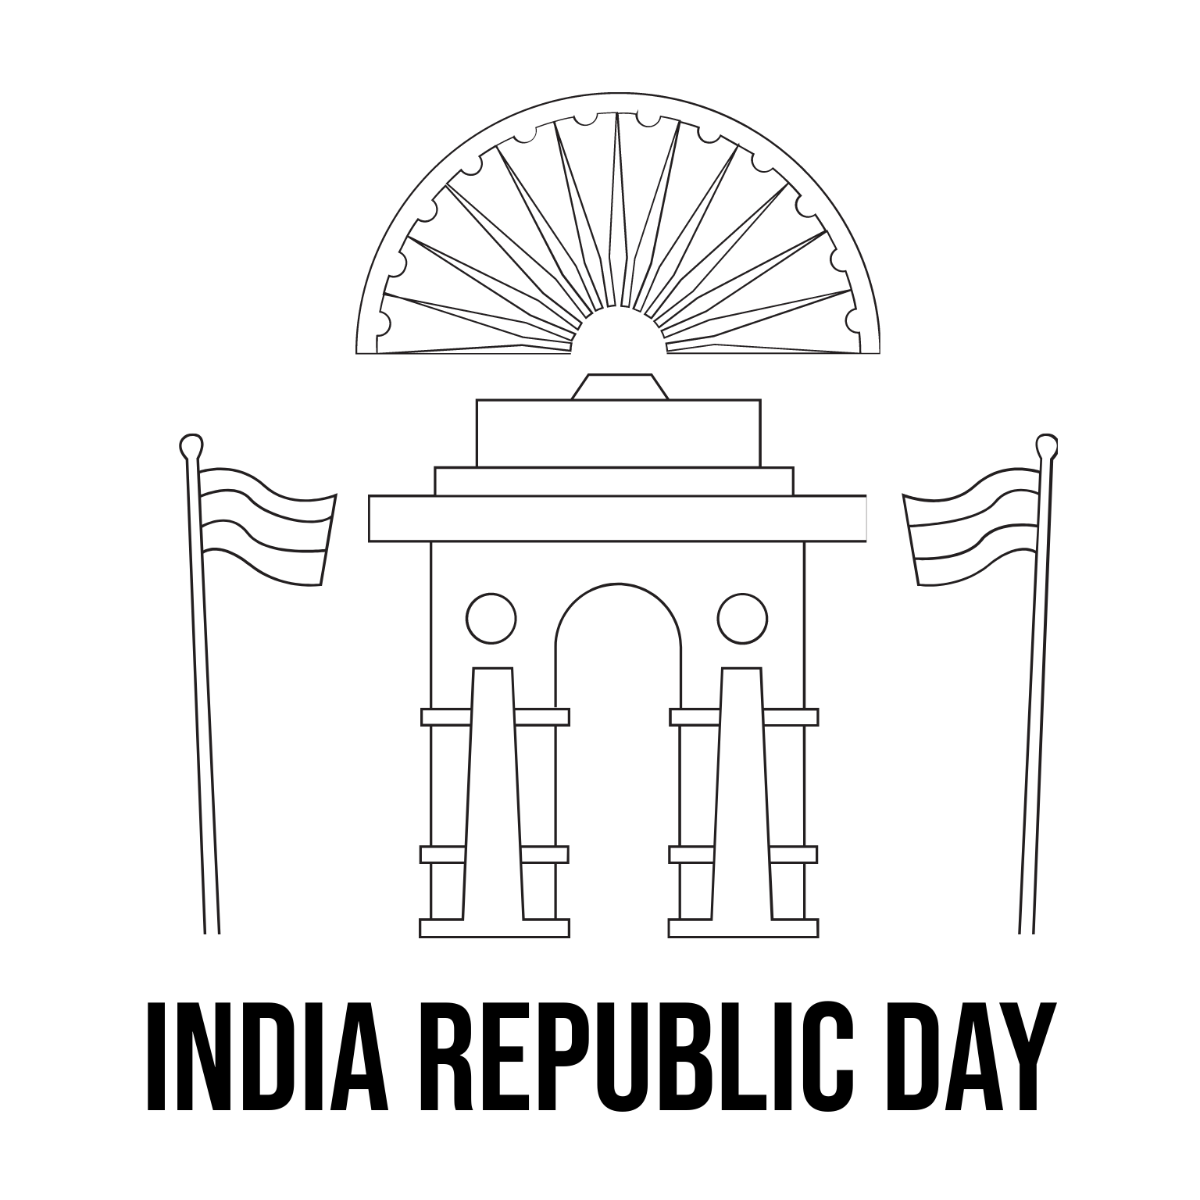 Free Republic Day Image Drawing Template